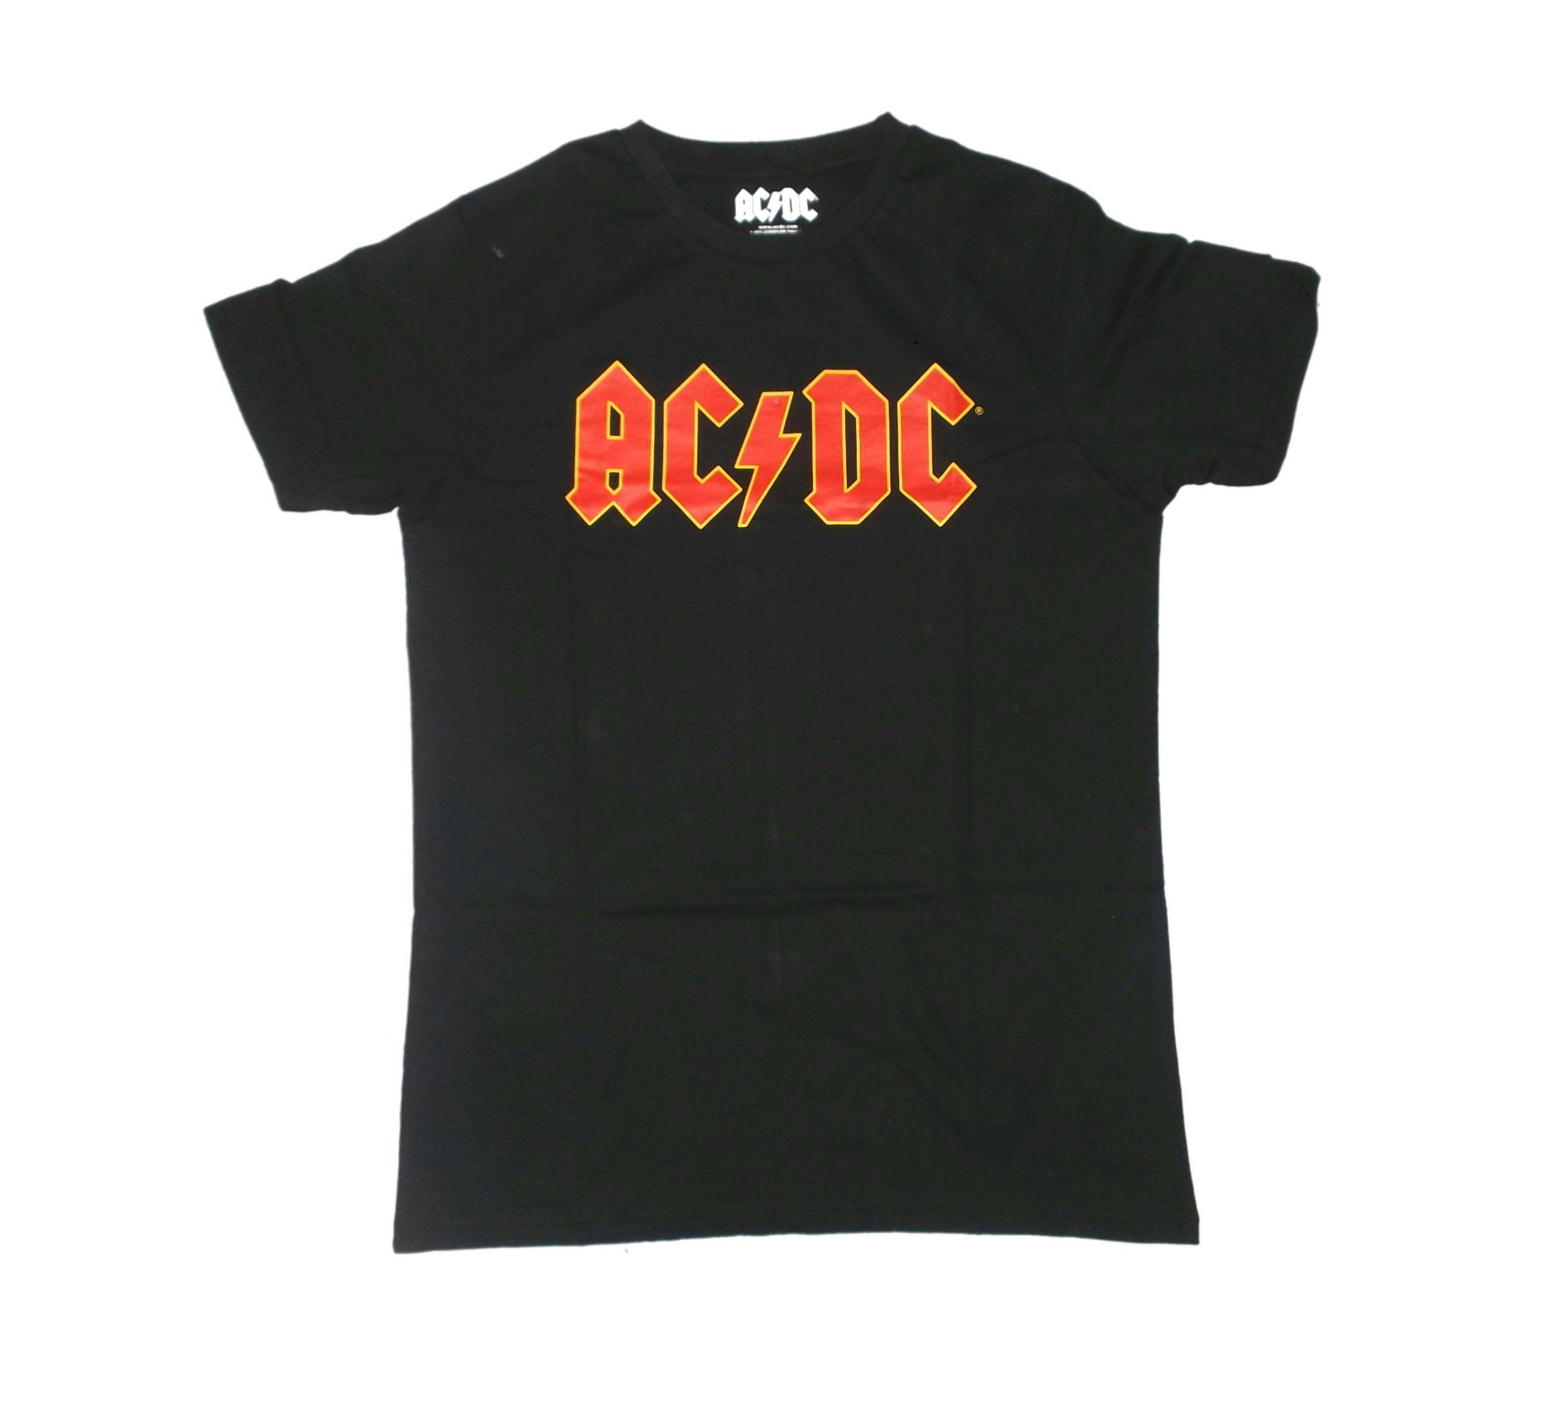 acdc Tシャツ　デカロゴ　激レア　バンド　　ロック　黒　レトロトップス